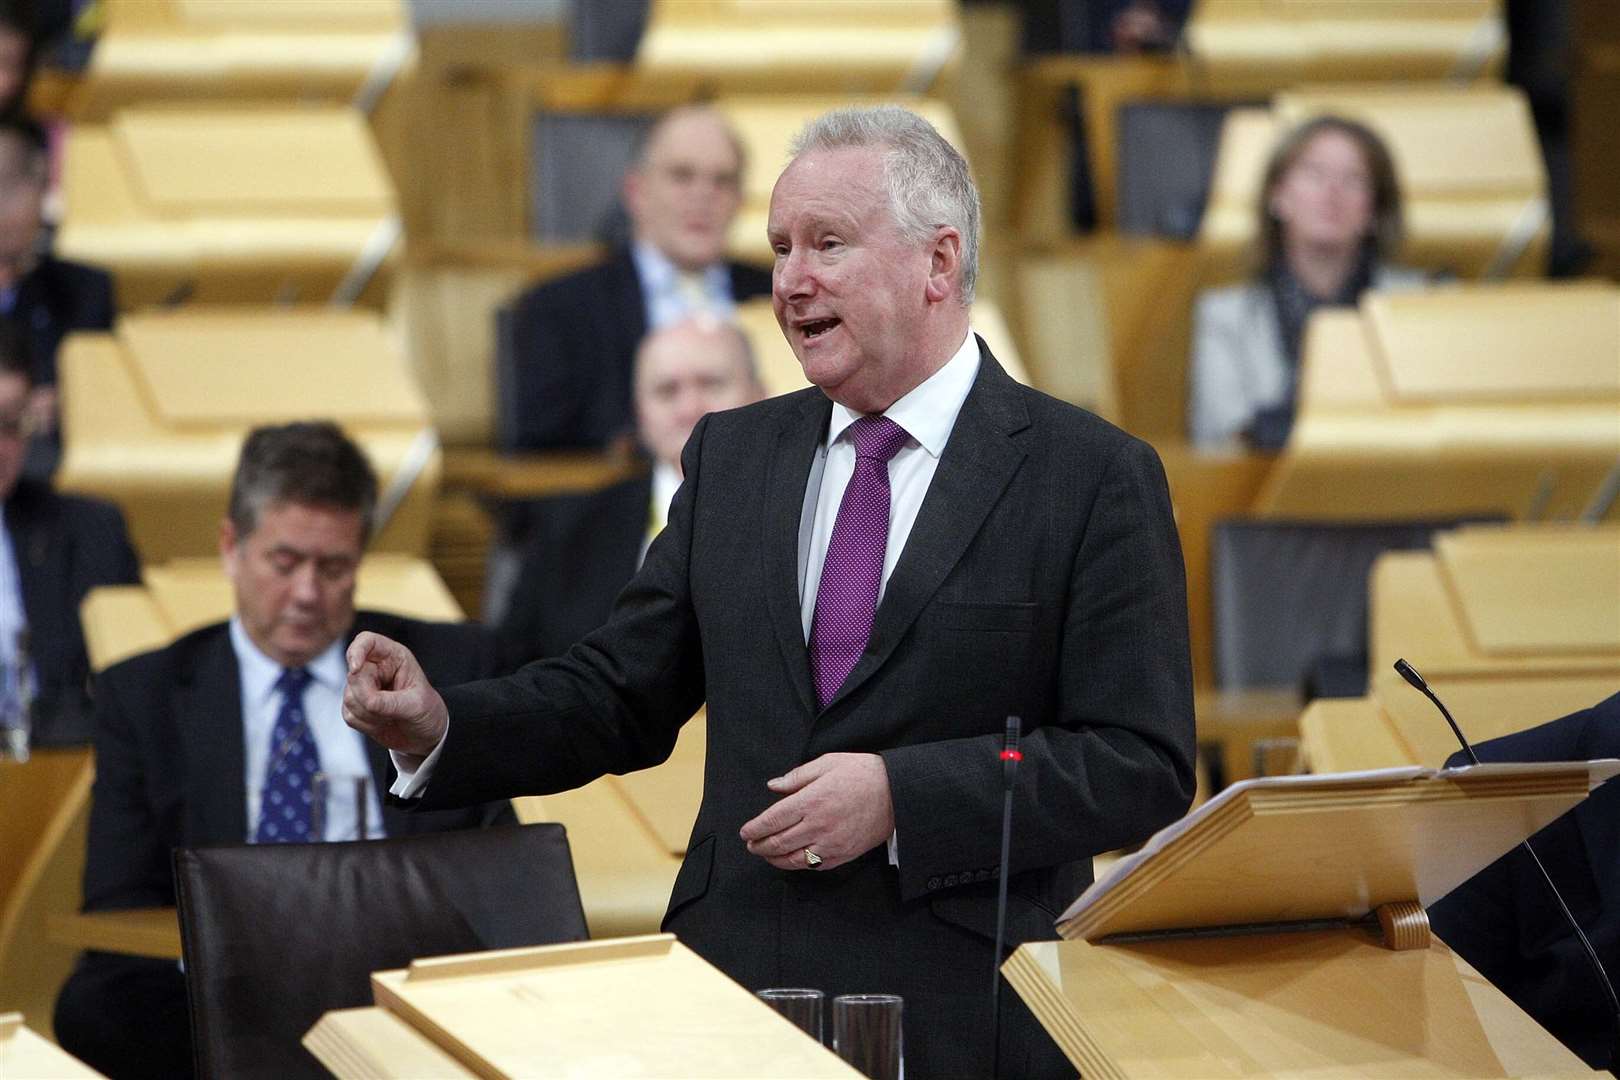 Alex Neil is not seeking re-election to Holyrood (Andrew Cowan/PA)